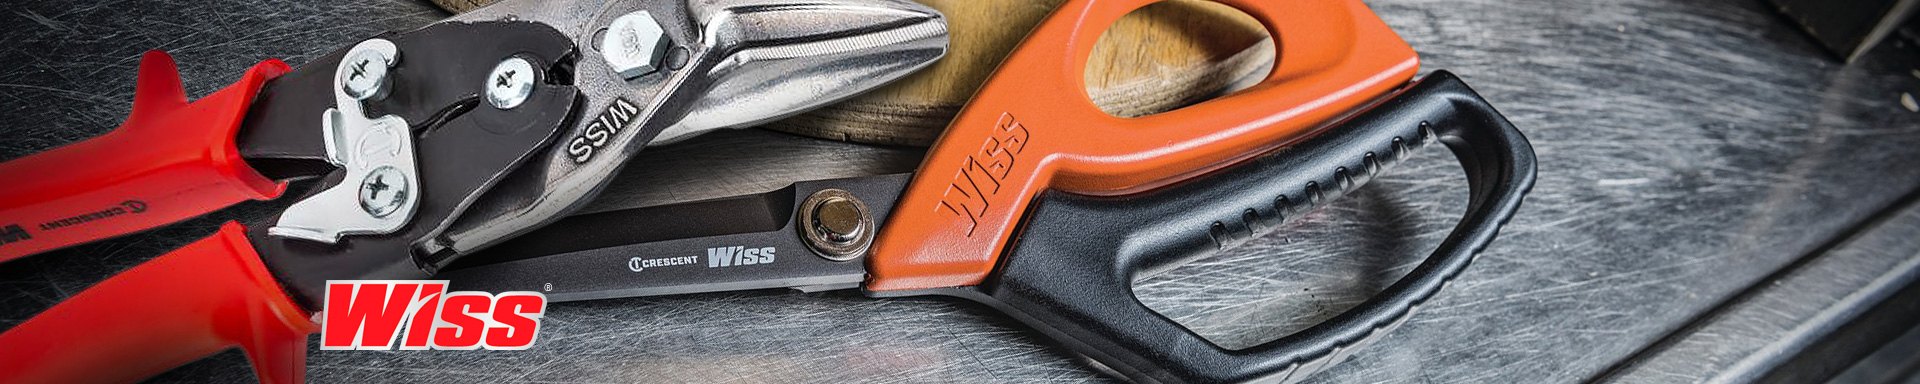 Wiss Utility Knives